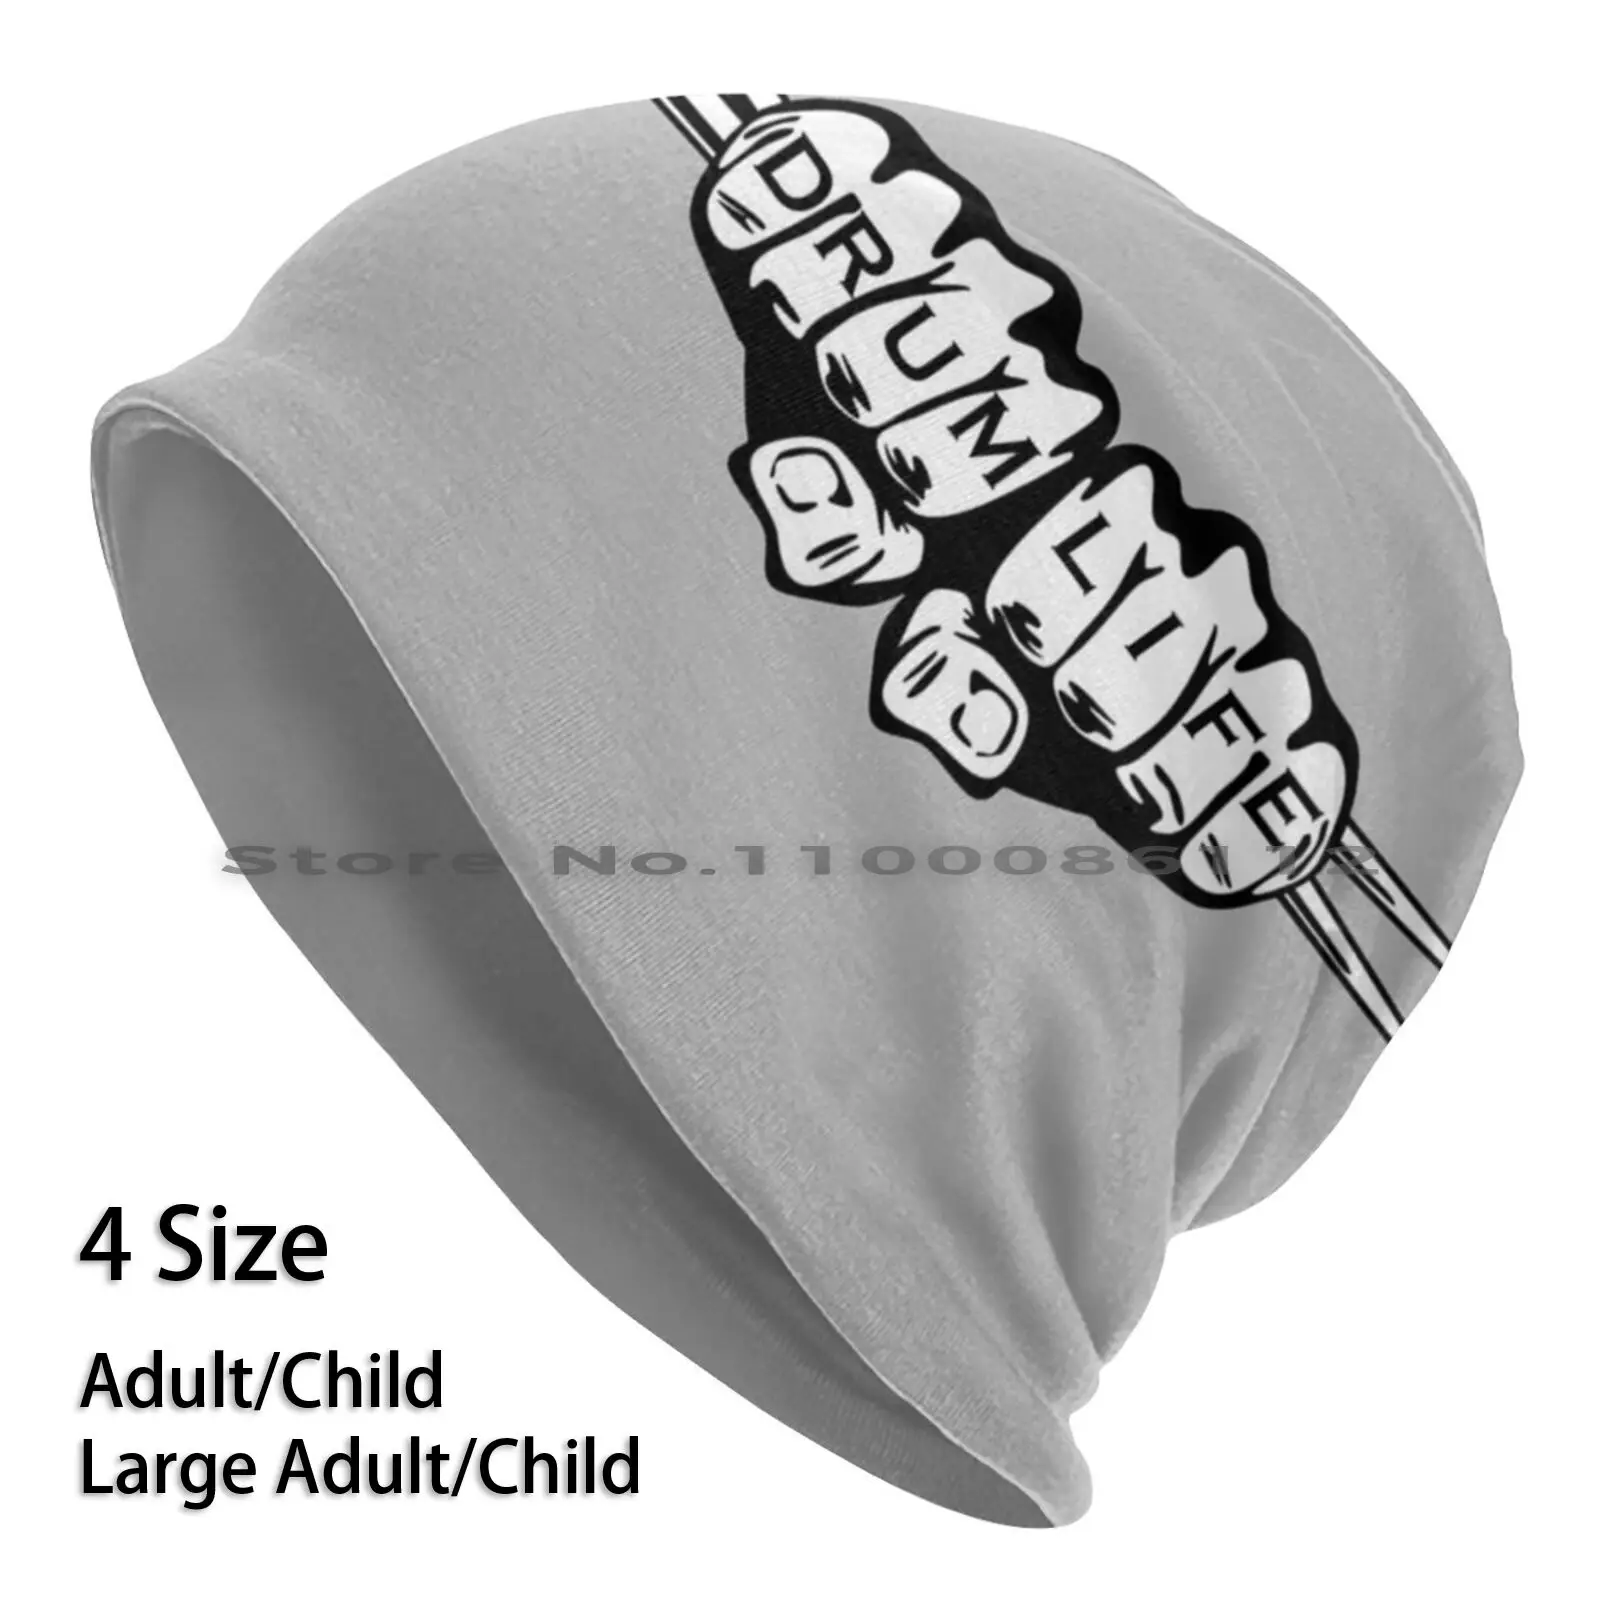 

Drum Life Drummer Design Beanies Knit Hat Musician Funny Percussion Drumming Bands Cool Cute Drummers Drumsticks Heavy Metal